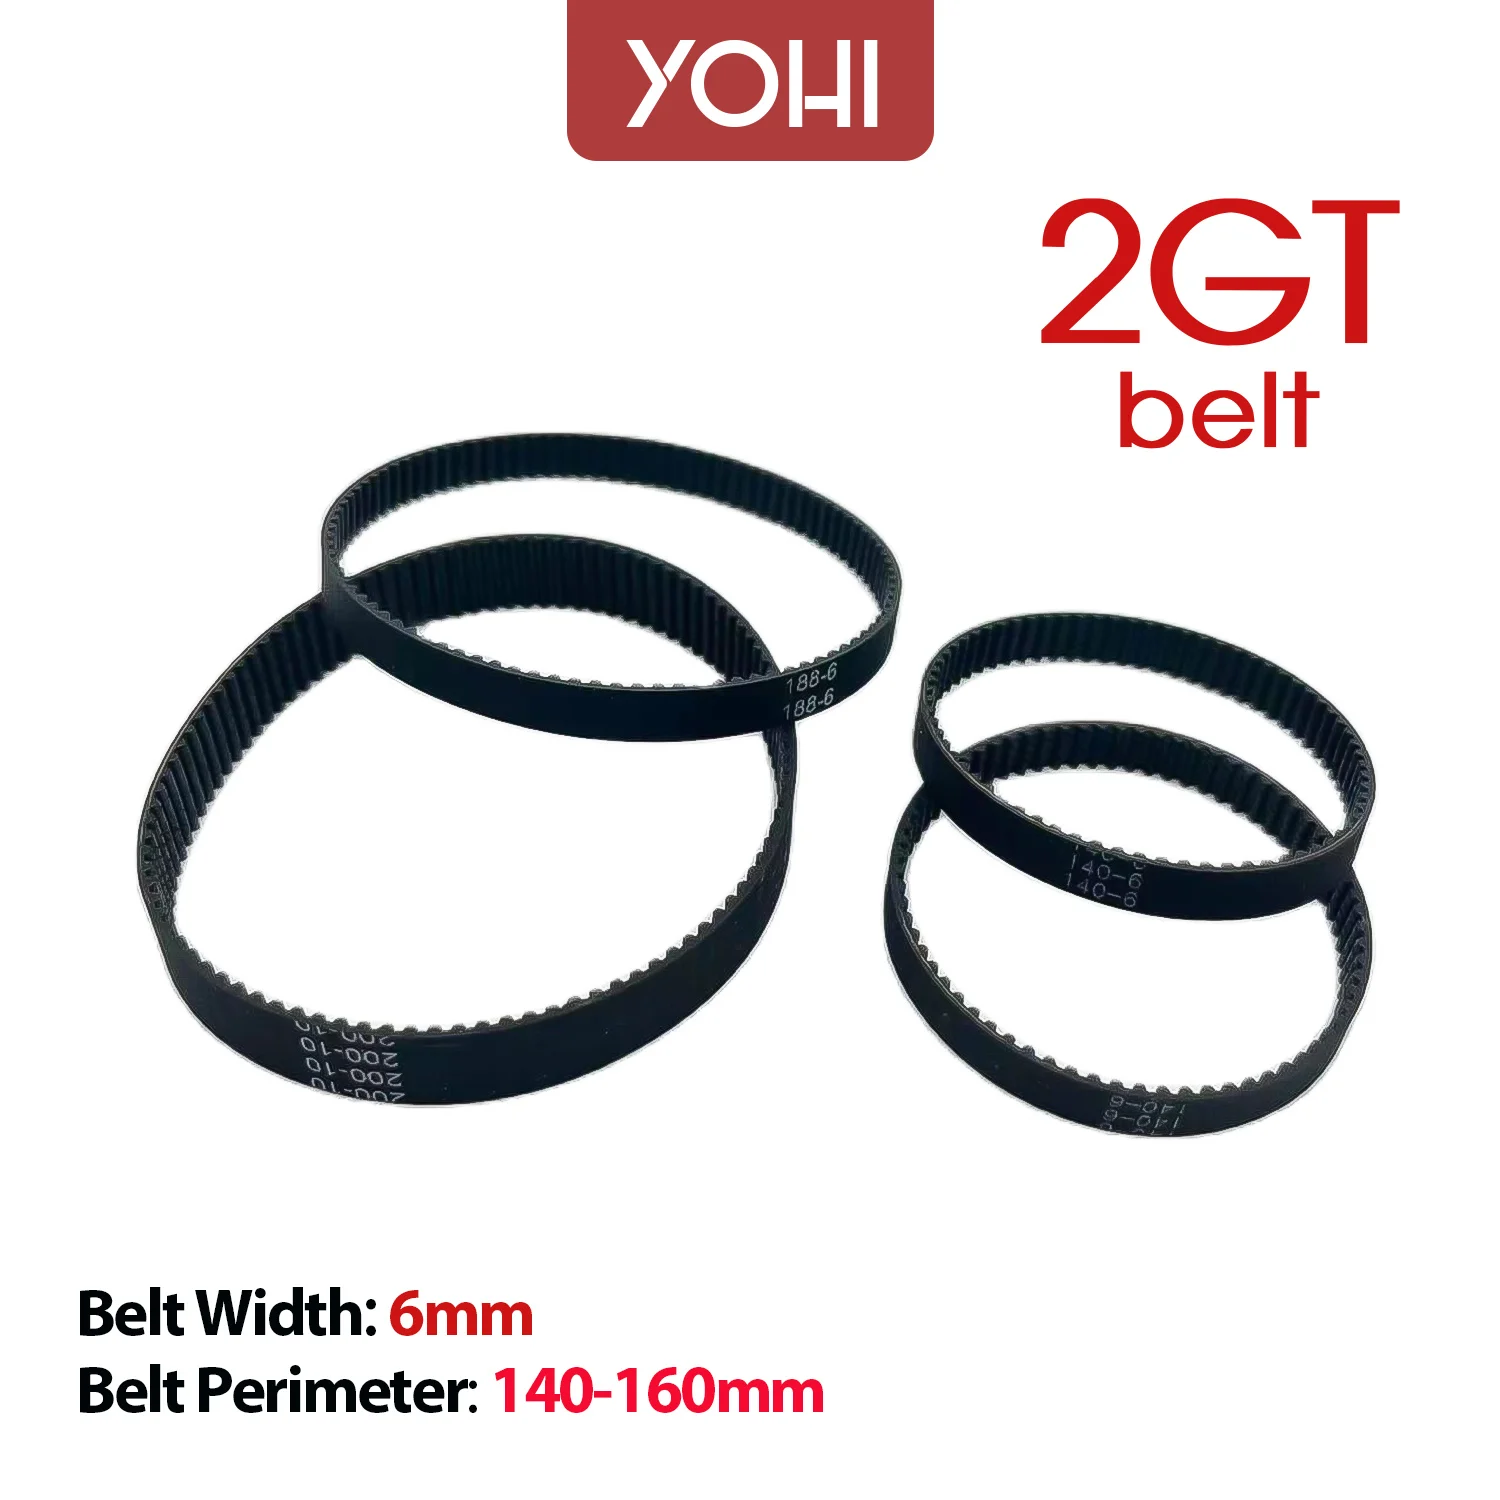 

Youhi GT2 Timing Belt Pitch Length 140/142/144/146/148/150/152/154/156/158/160mm Width 6mm Rubber Closed